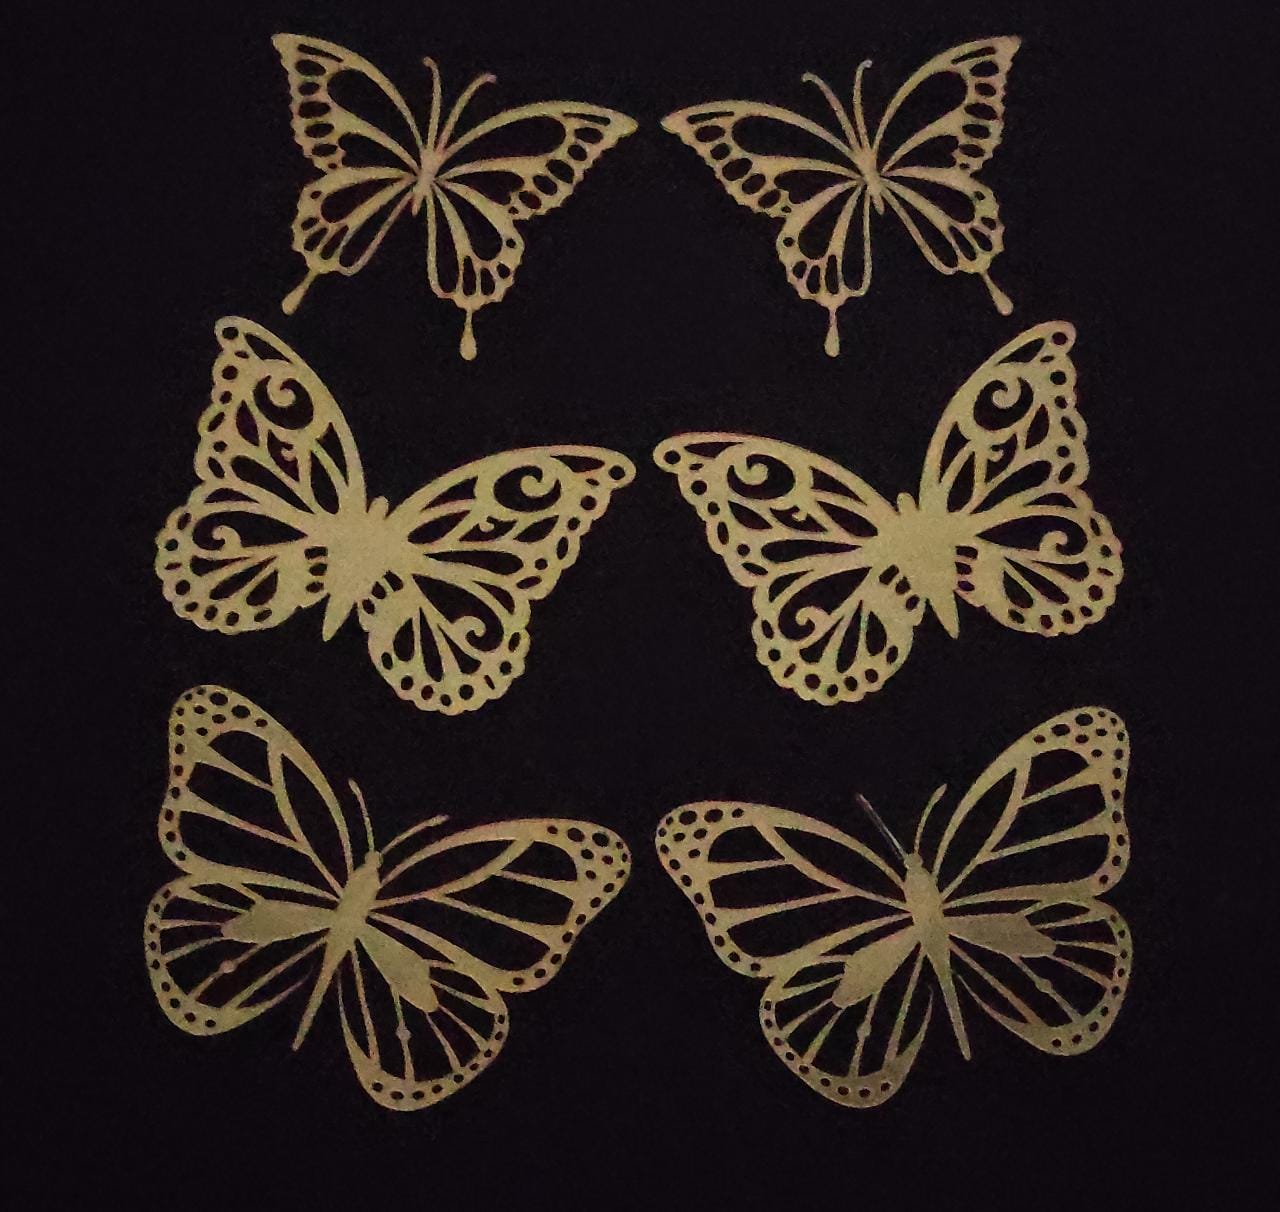 6 PCs Acyrlic Golden Non Edible Butterfly For Cake Decoration(Big)